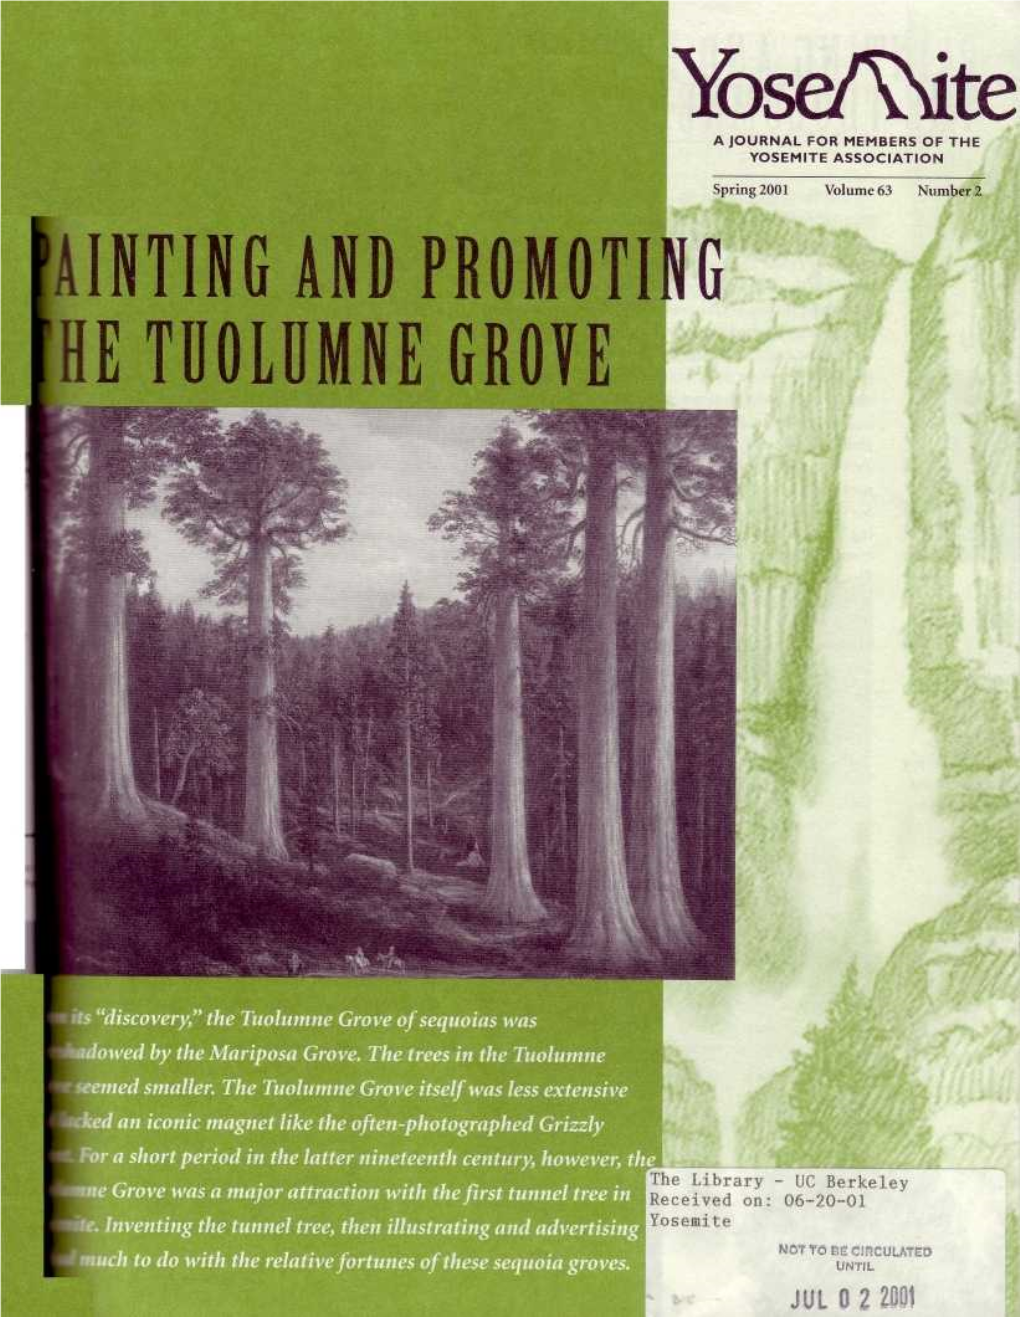 Hinting and Promoting He Tuolumne Grove